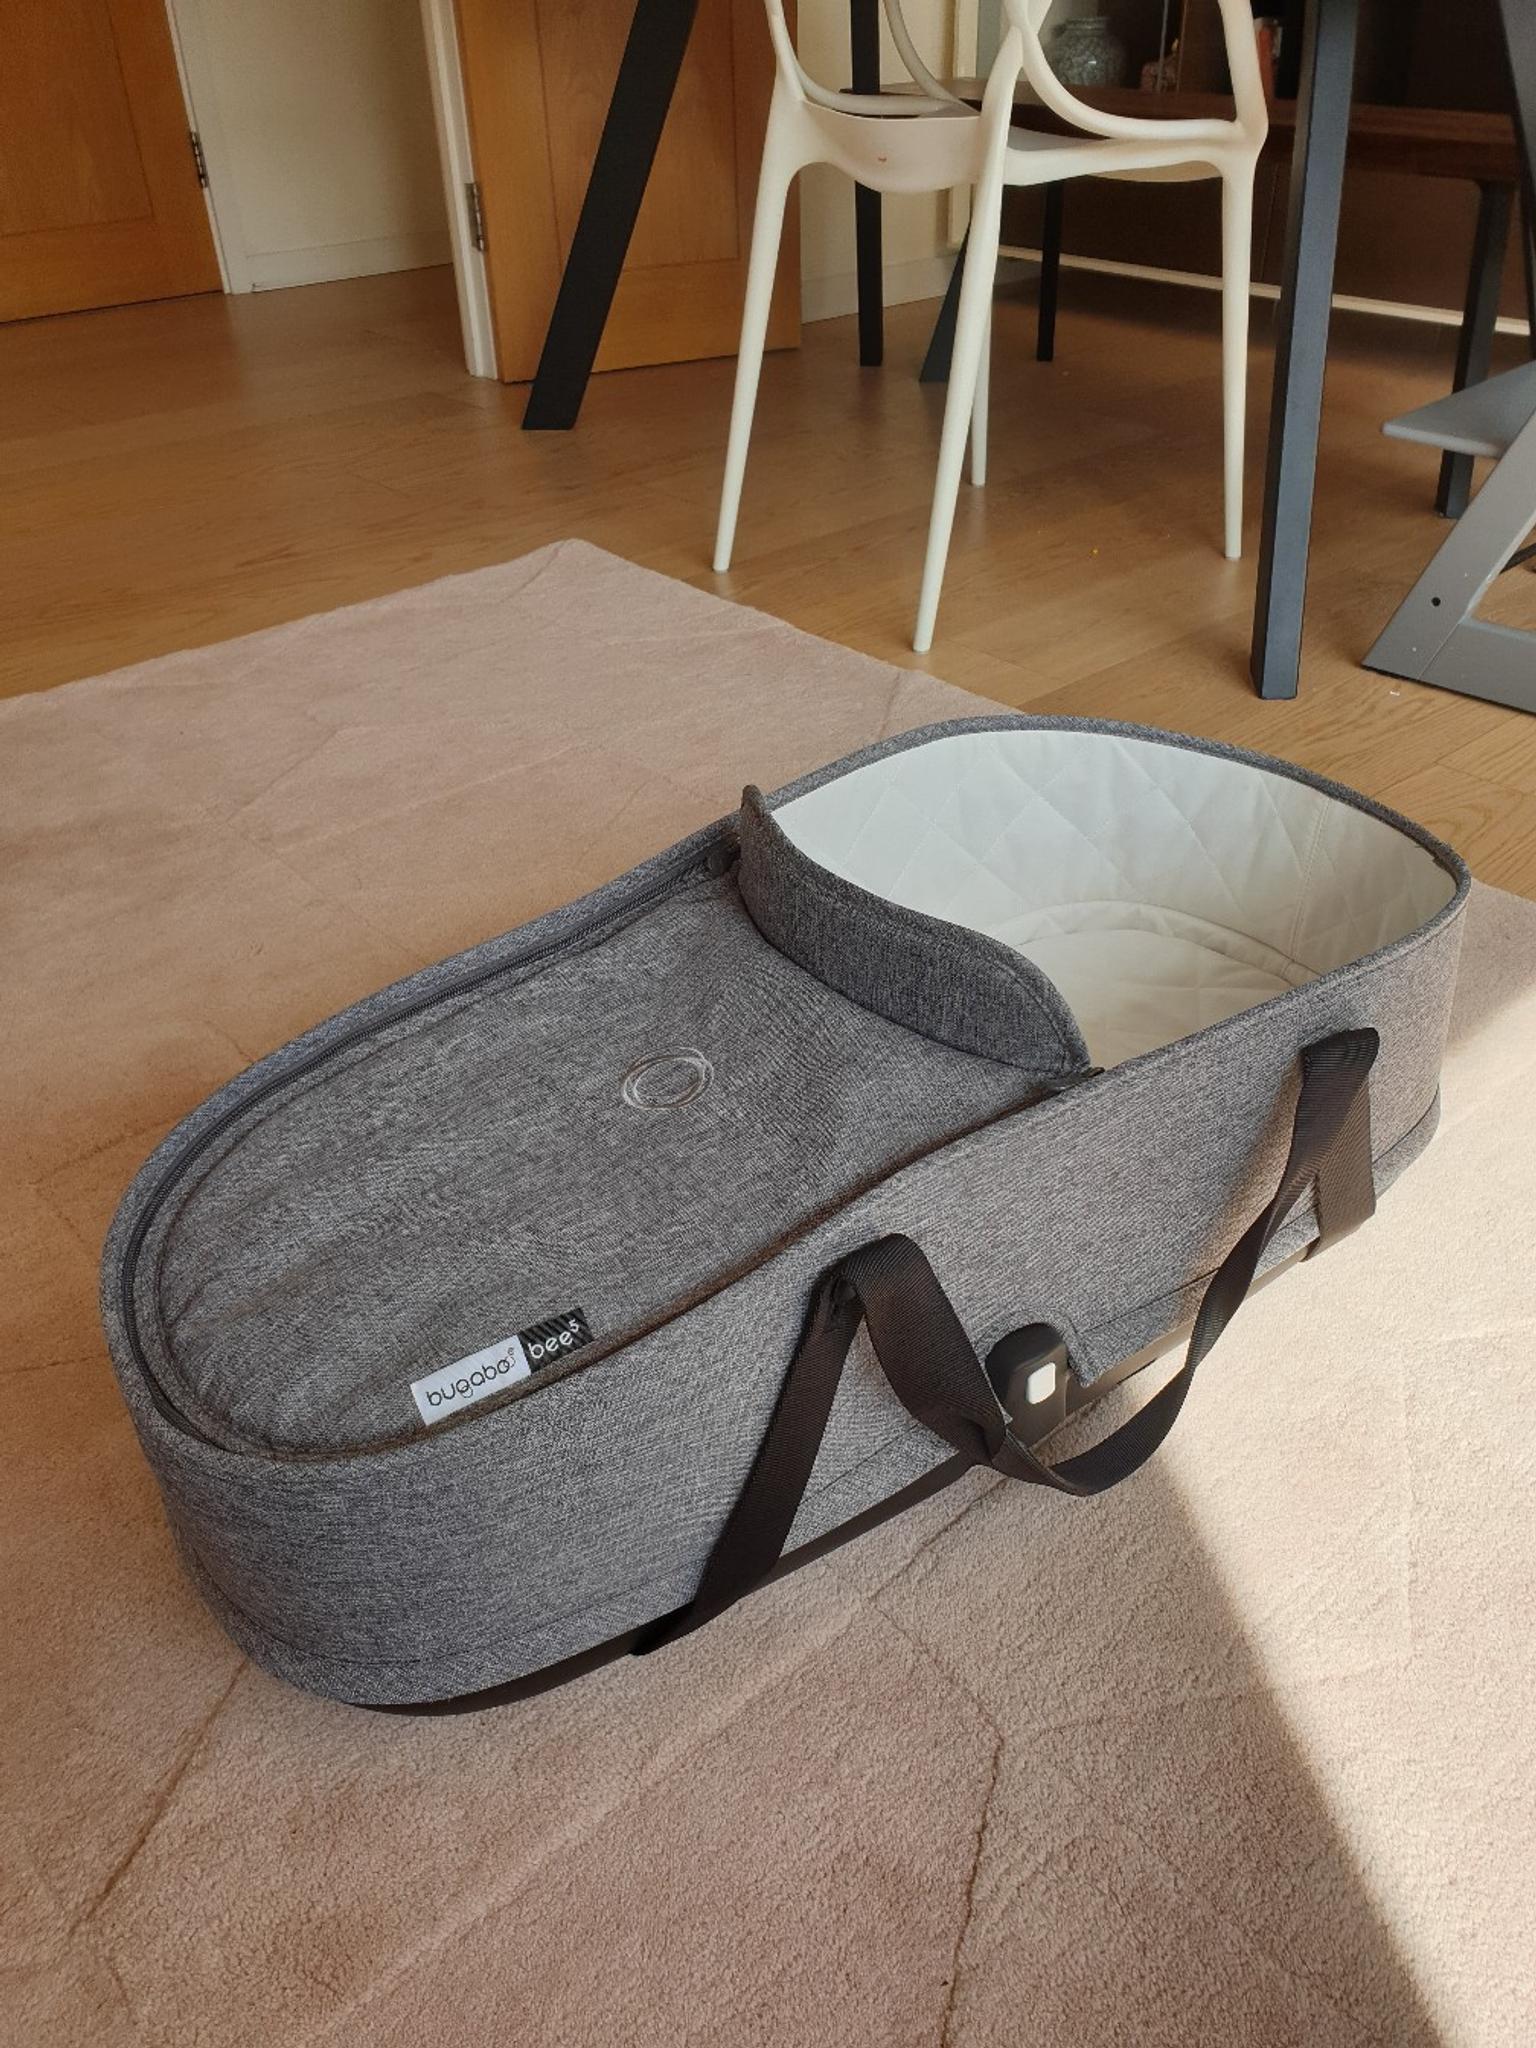 bugaboo bee carrycot base